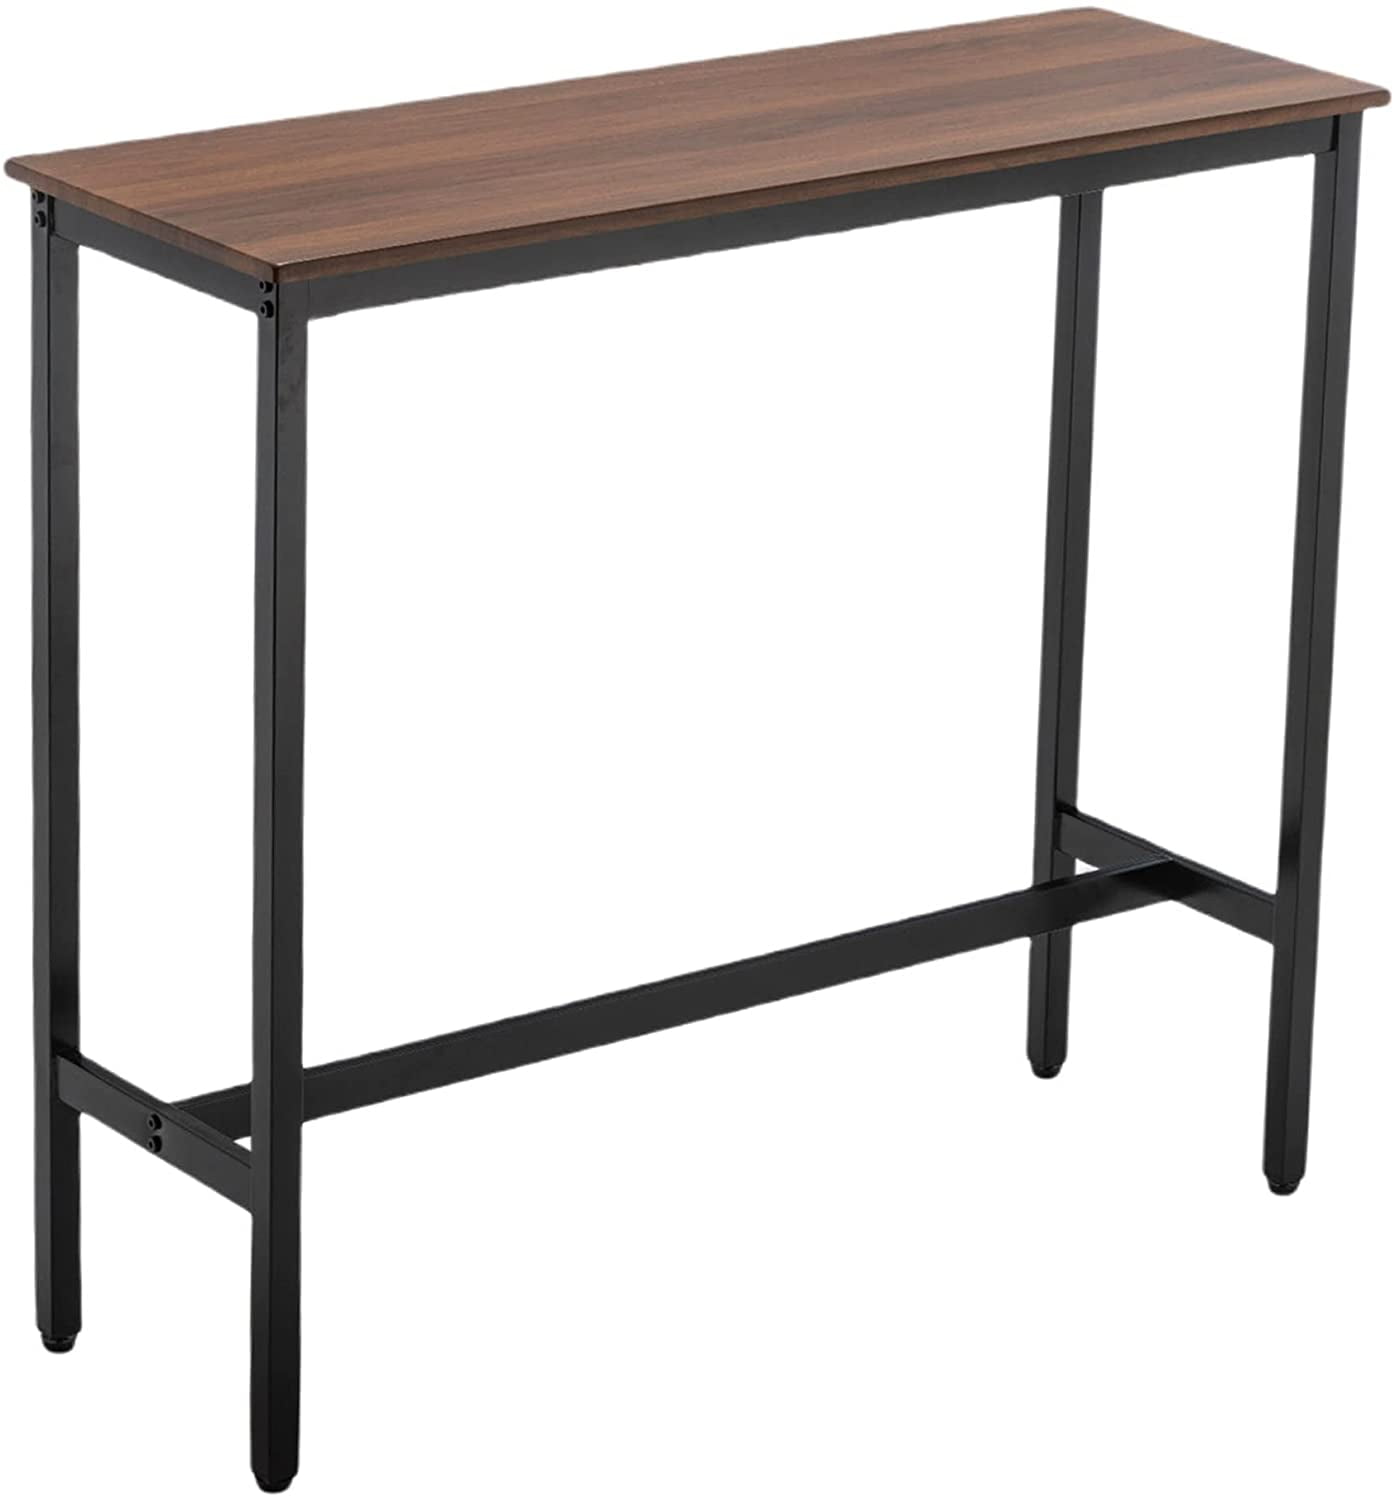 Andeworld Modern Rectangle Bar Table Kitchen Dining Table 41 Bar Height Pub Table Industrial